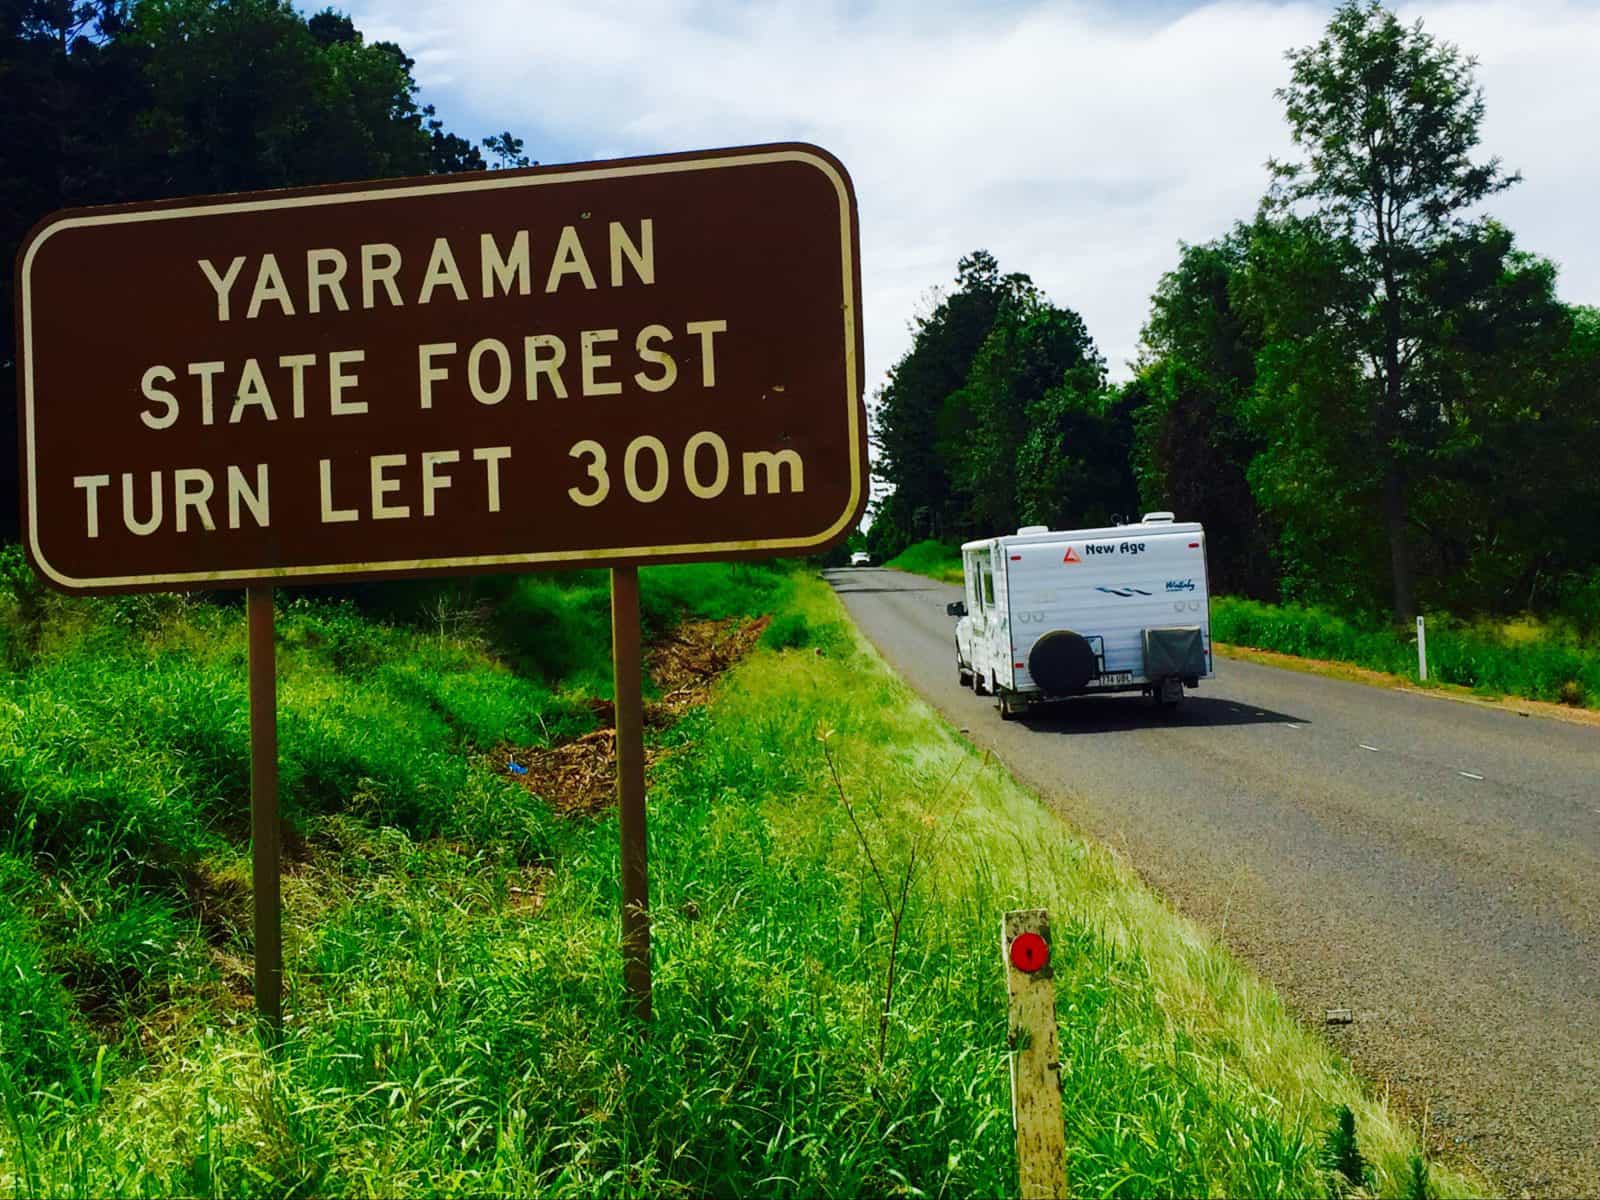 Yarraman State Forest